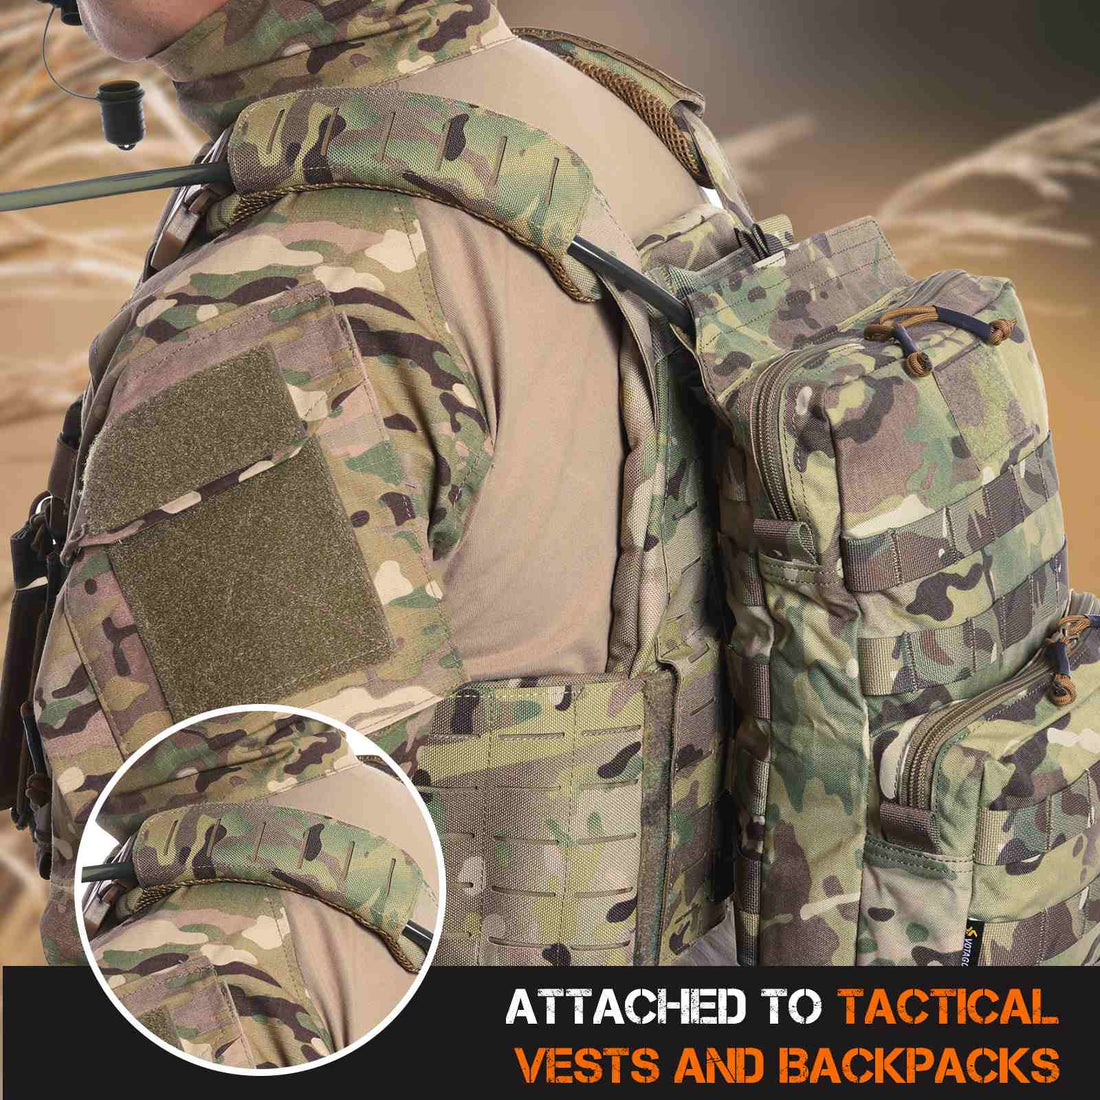 Tactical Molle Hydration Pack 3L Hydration Carrier Pack Water Reservoir Bag